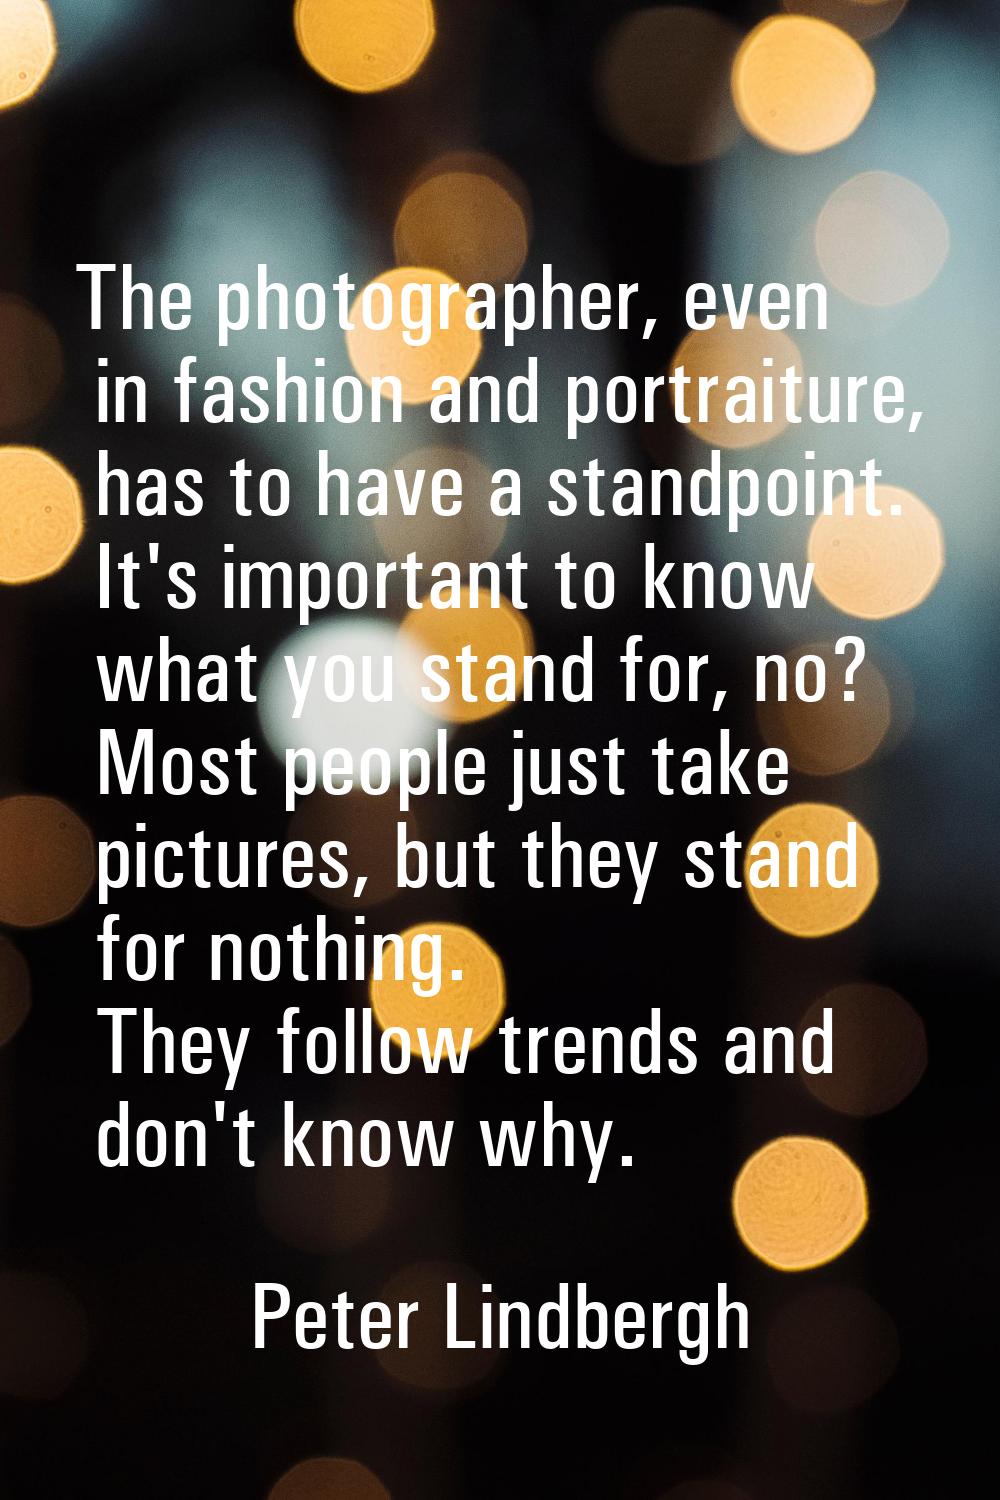 The photographer, even in fashion and portraiture, has to have a standpoint. It's important to know